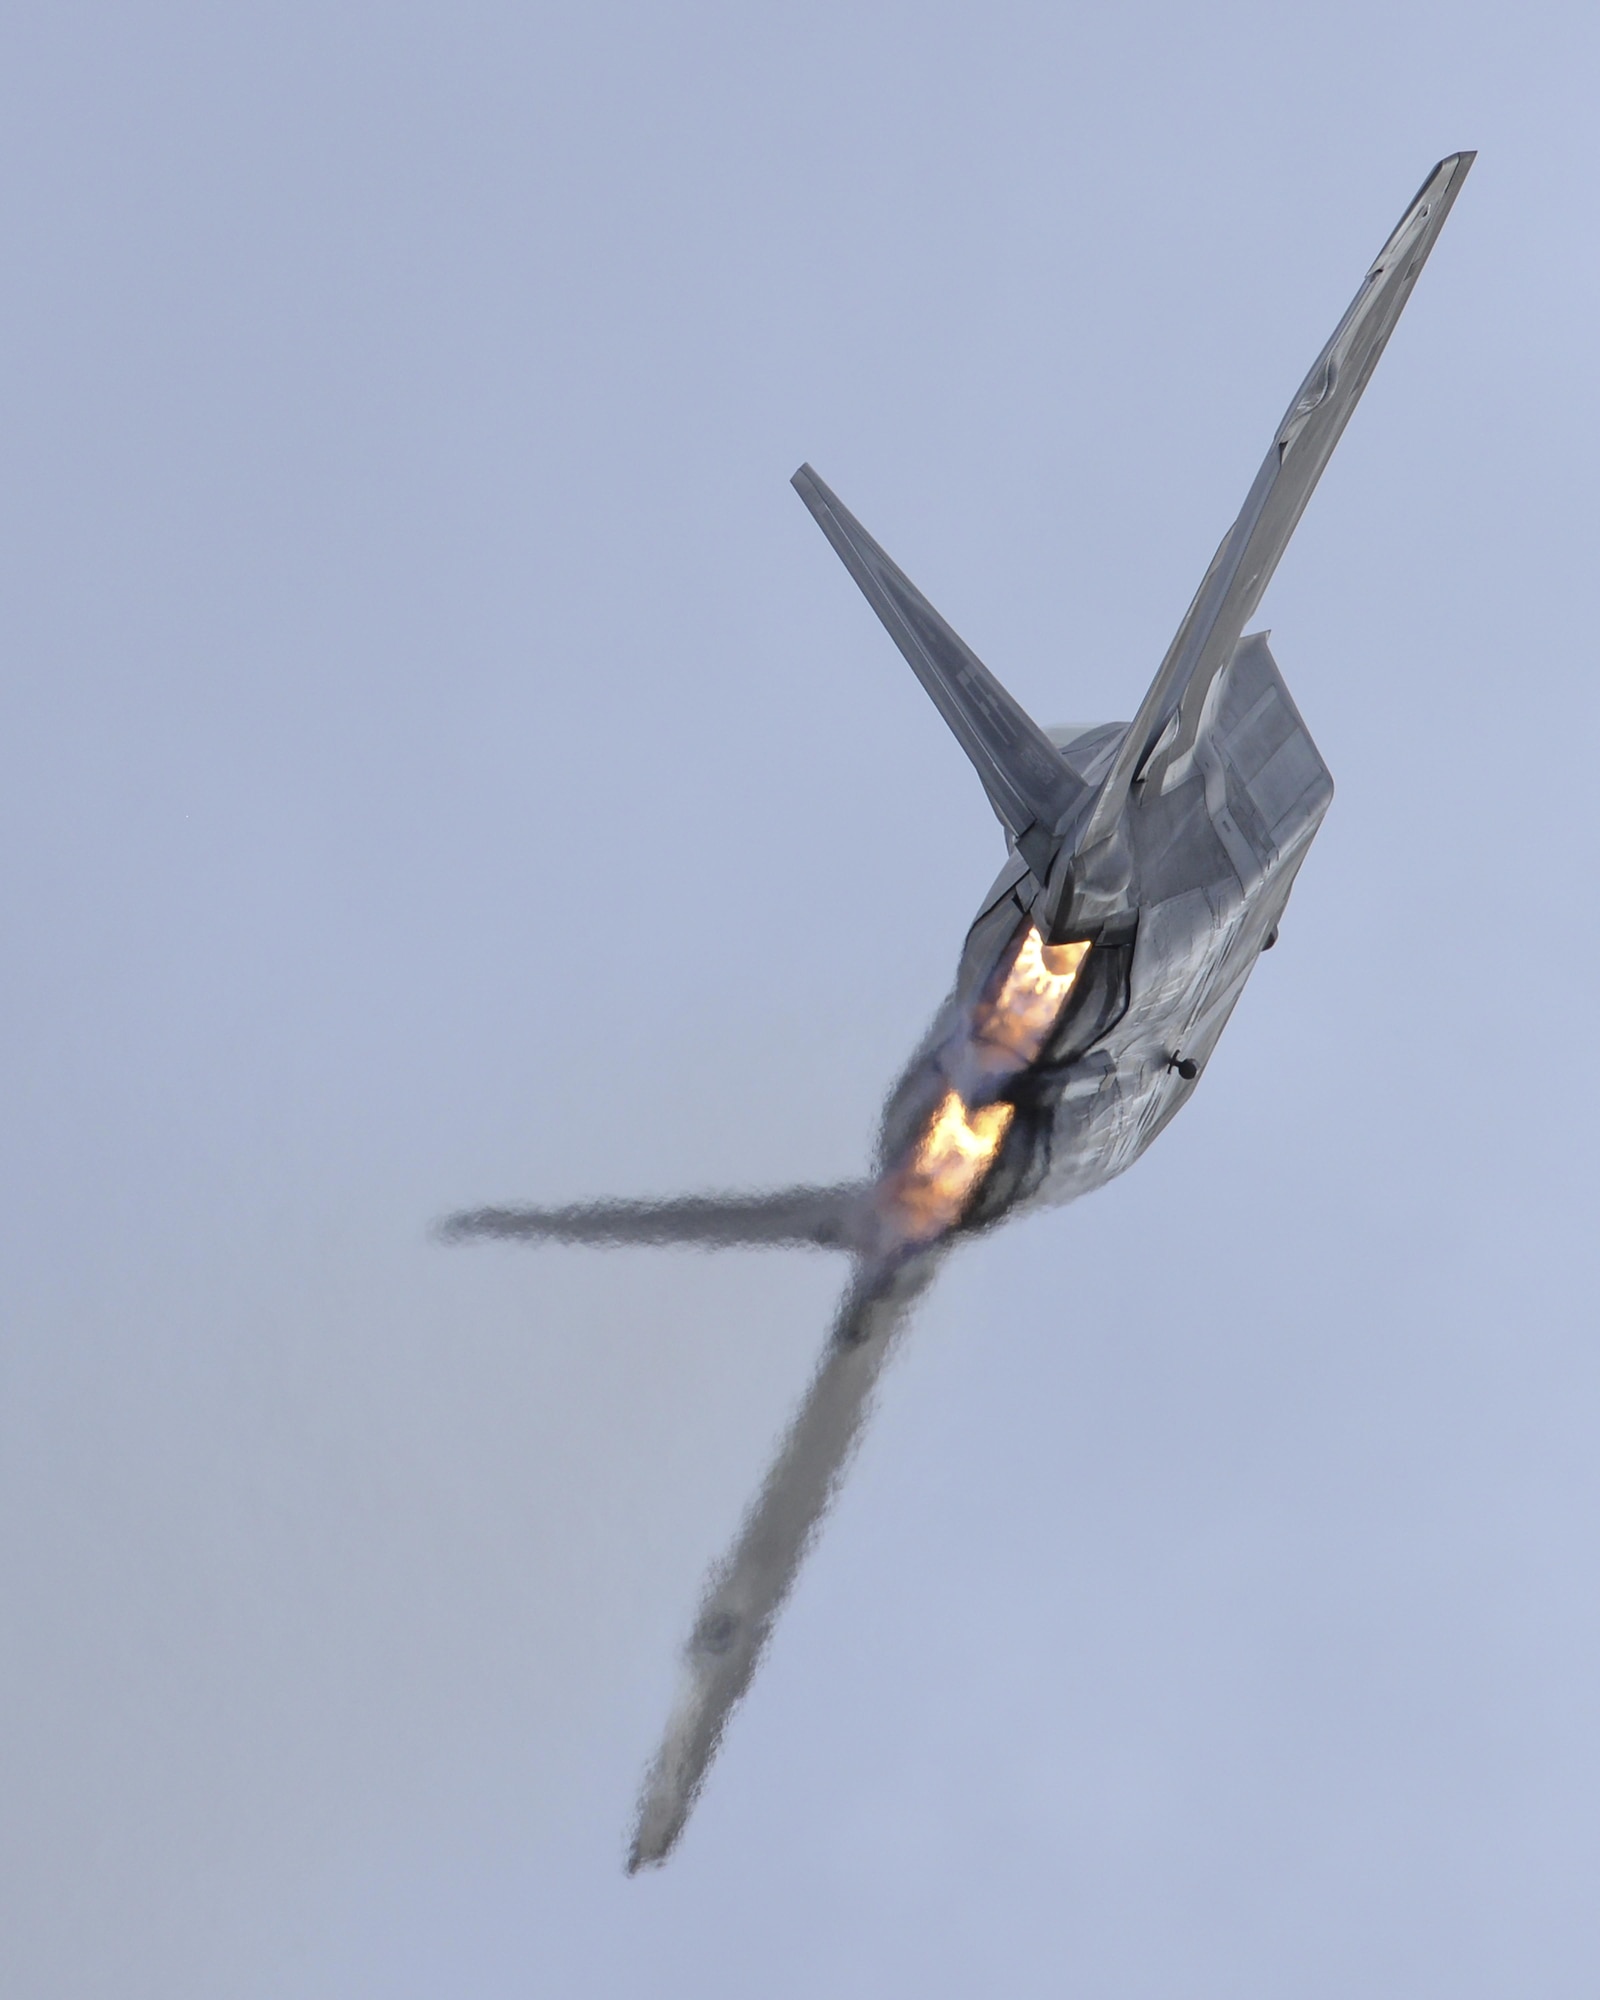 A U.S. Air Force F-22 Raptor performs an aerial maneuver during the 2016 Heritage Flight Training and Certification Course at Davis-Monthan Air Force Base, Ariz., March 5, 2016. The Raptor performs both air-to-air and air-to-ground missions allowing full realization of operational concepts vital to the 21st century Air Force. (U.S. Air Force photo by Senior Airman Chris Massey/Released)